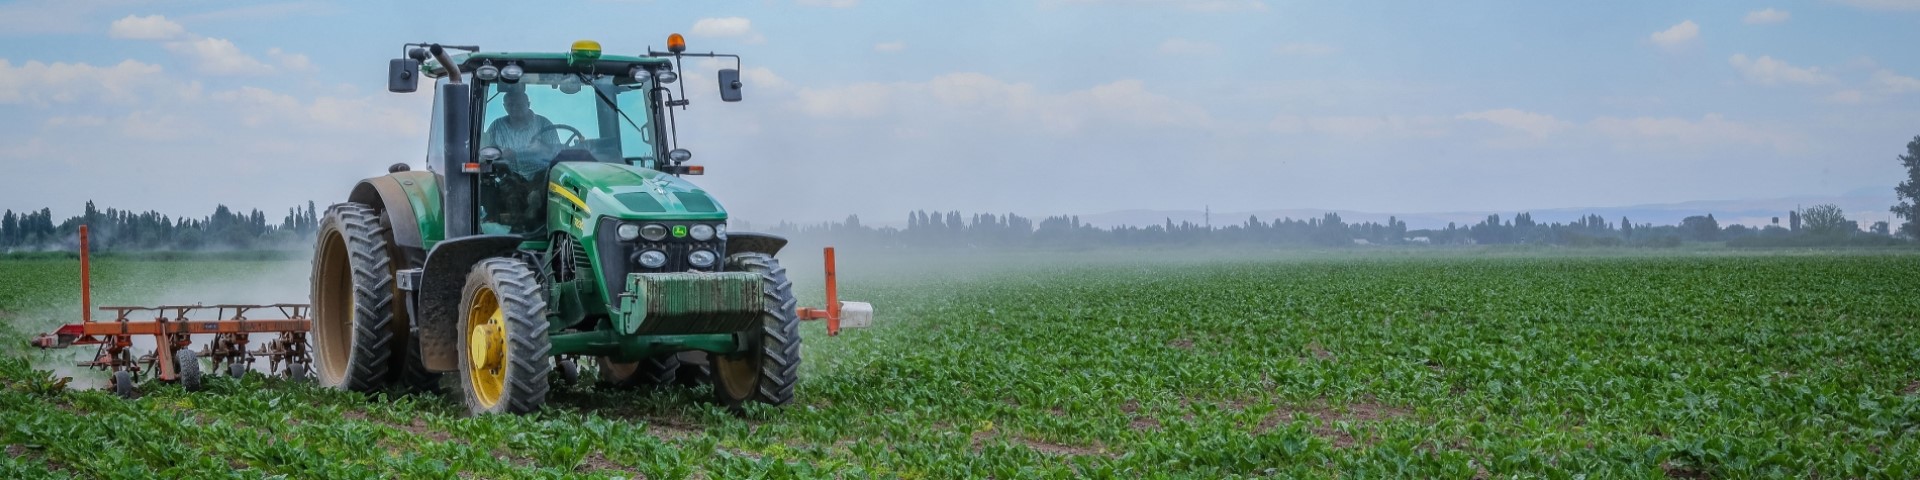 A tractor sprays water onto an agricultural field.